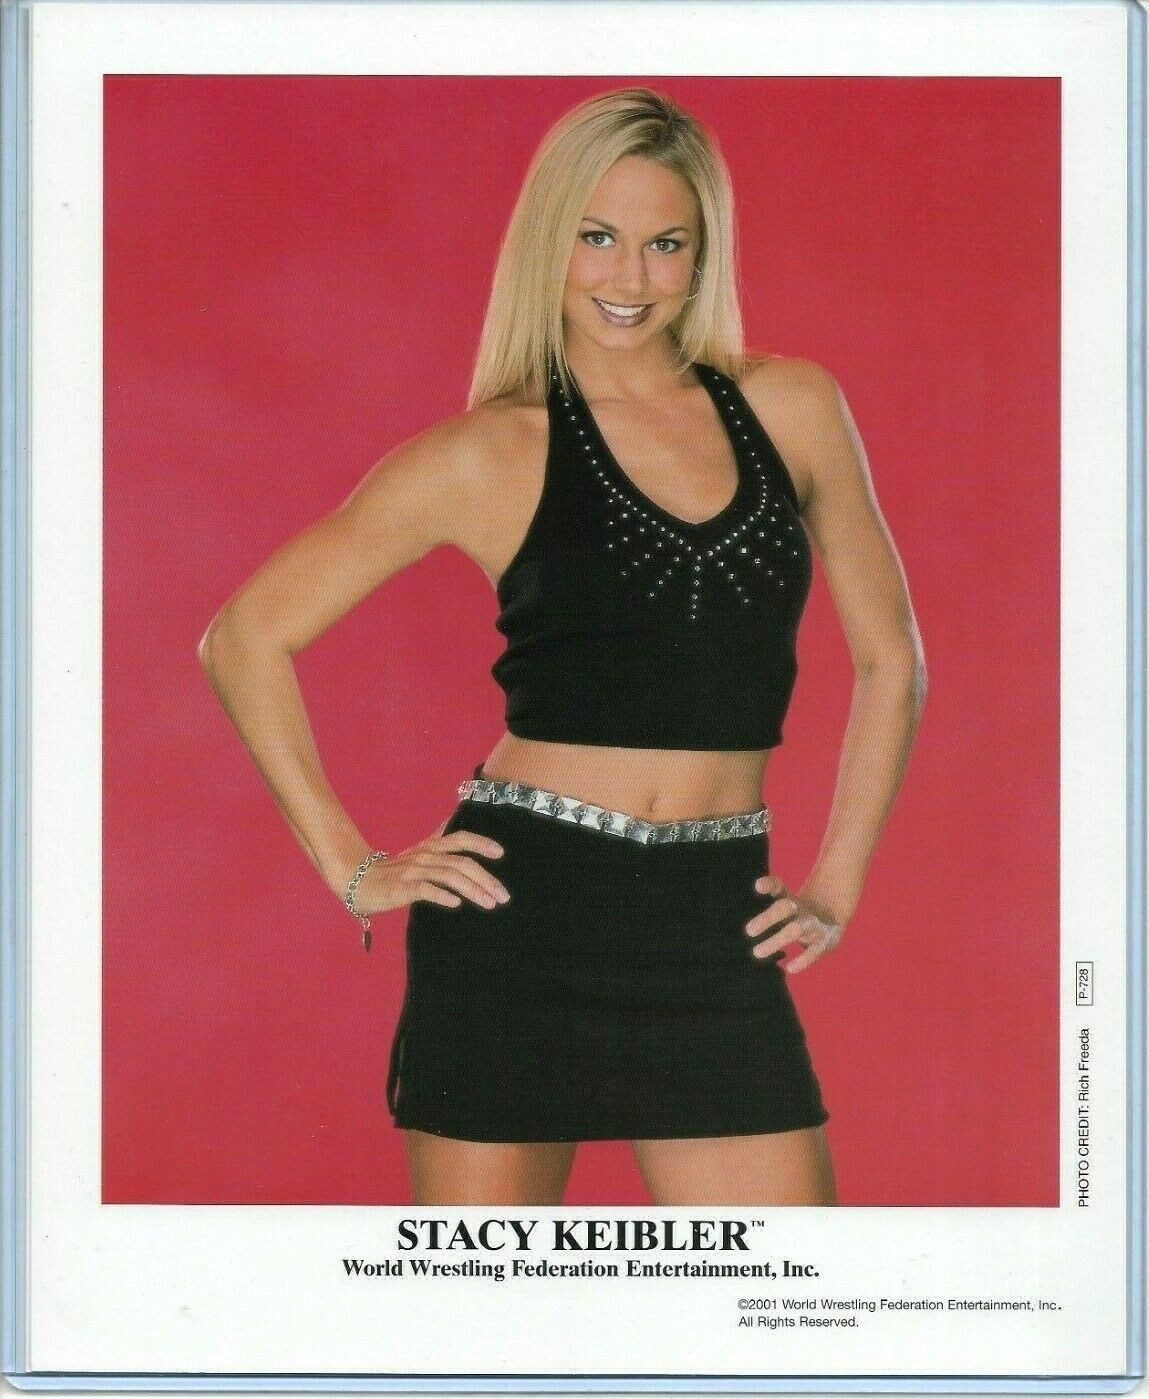 WWE STACY KEIBLER P-728 OFFICIAL LICENSED AUTHENTIC ORIGINAL 8X10 PROMO Photo Poster painting